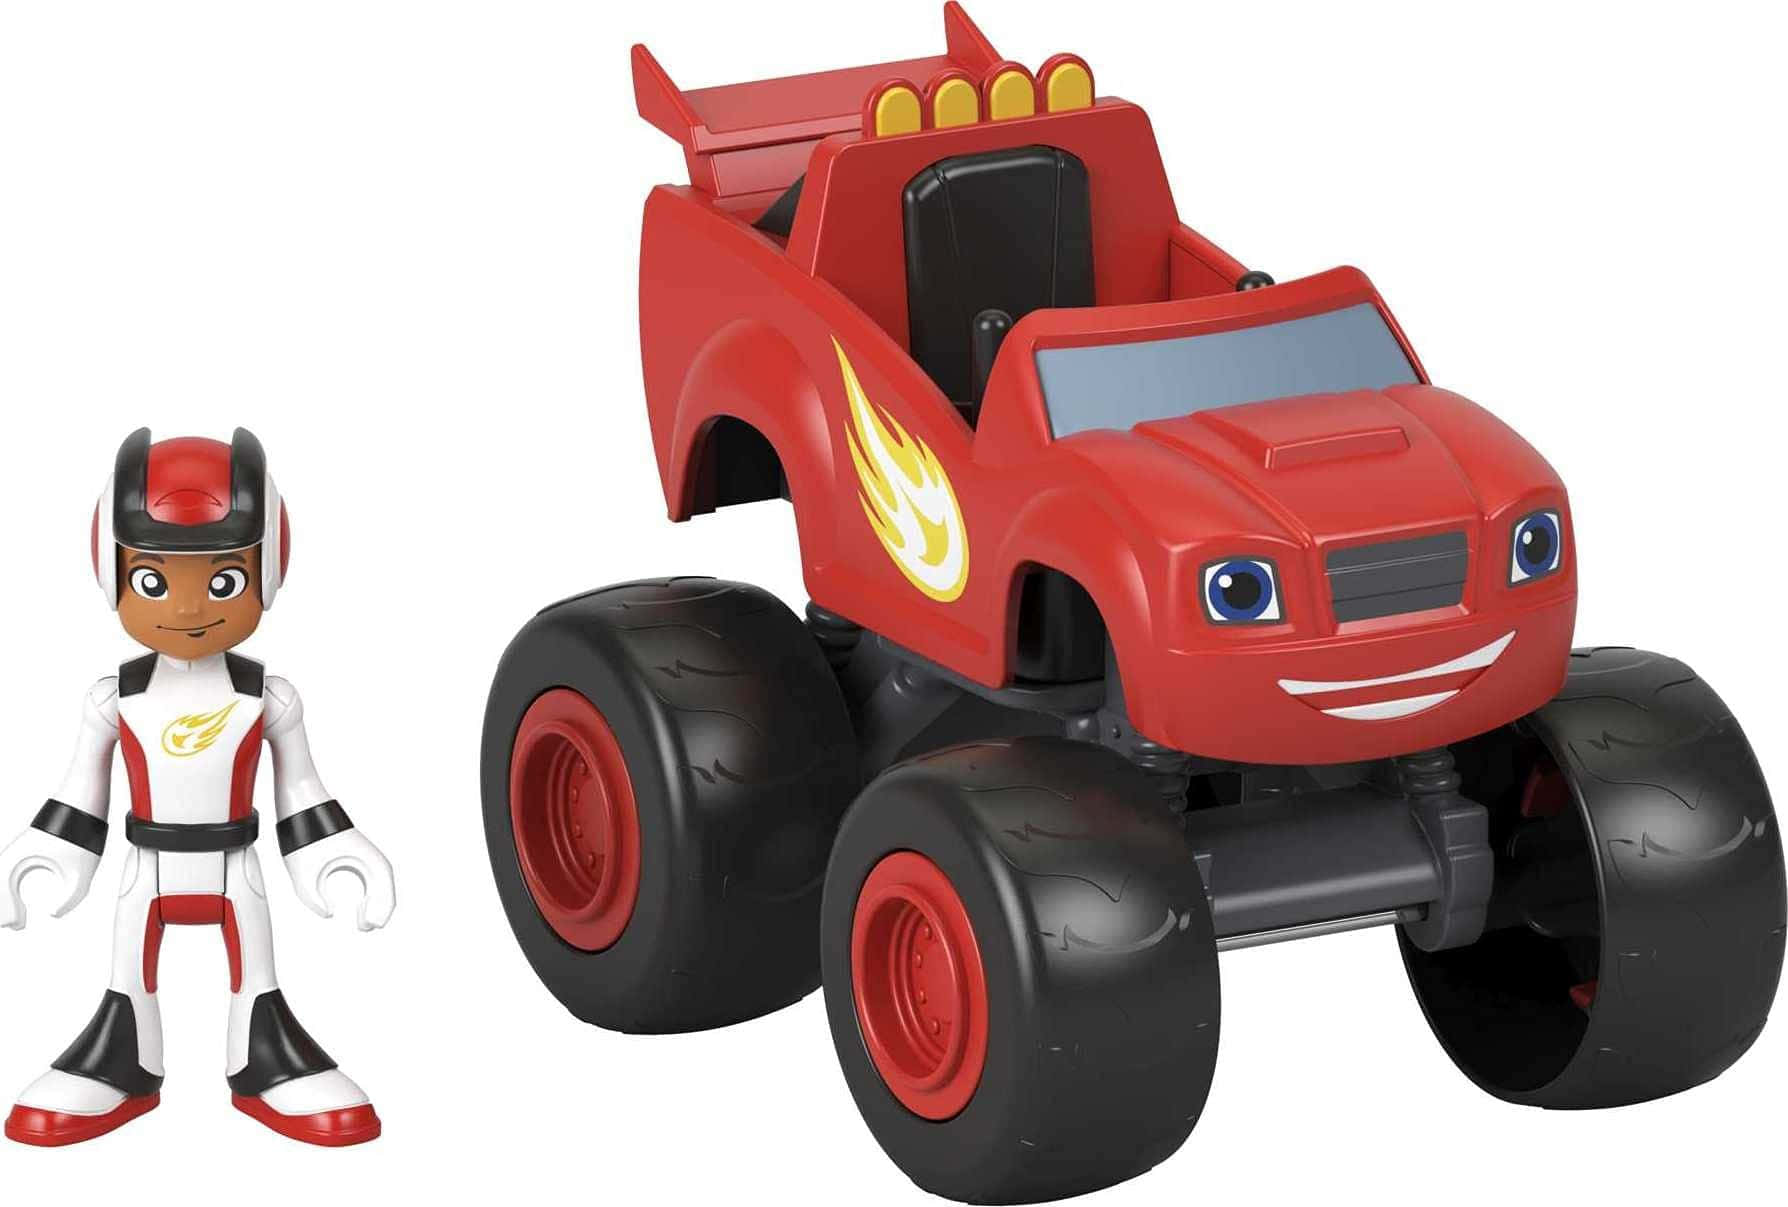 A Toy Truck And A Red Character